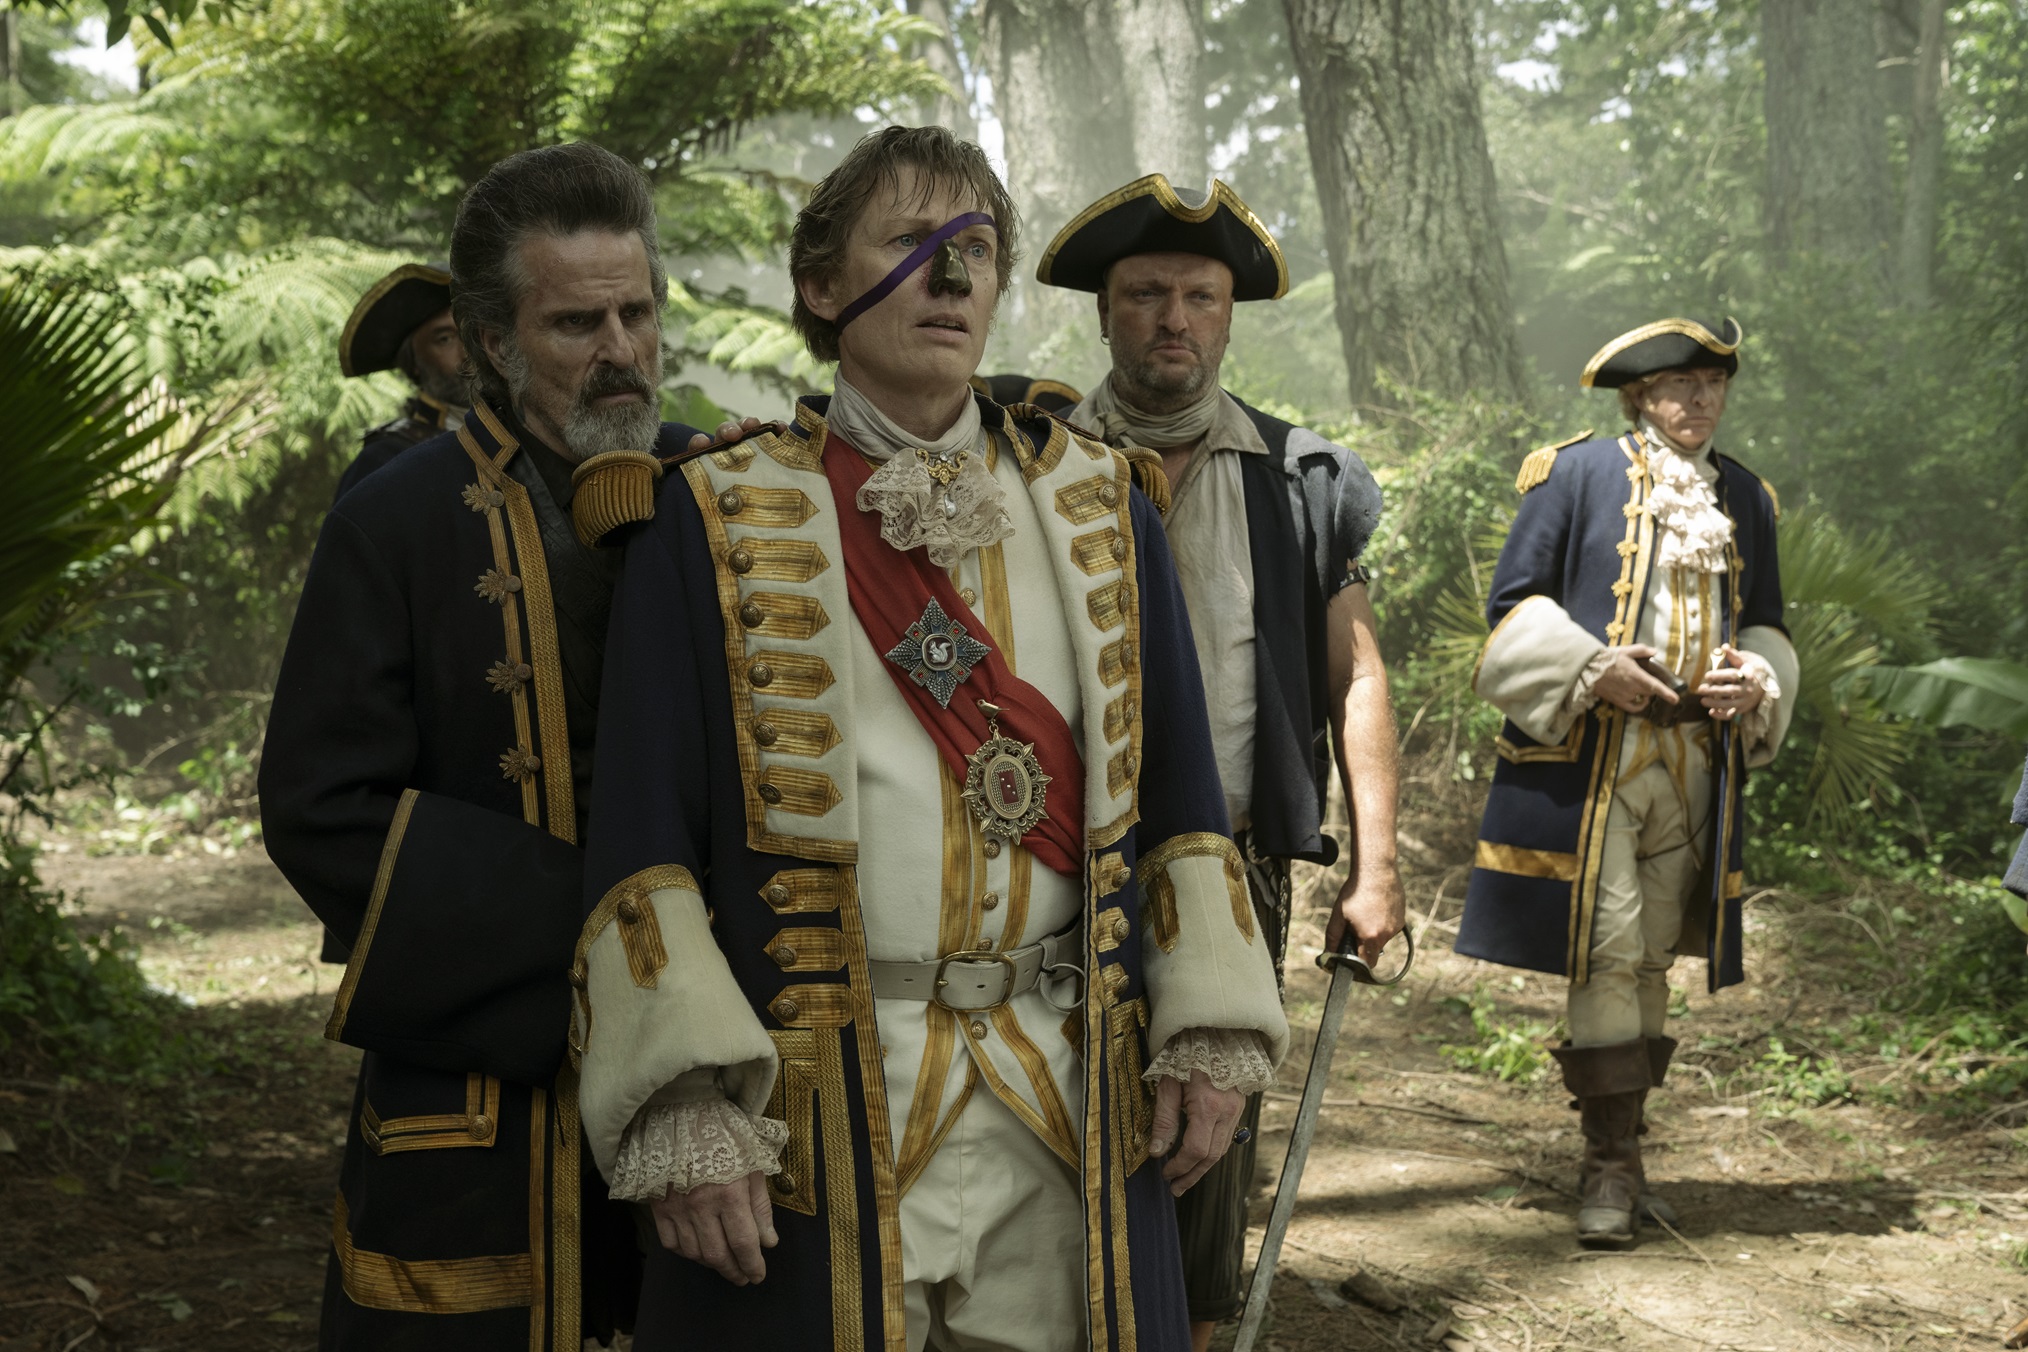 Con O'Neill, Erroll Shand, Matthew Maher, and Rhys Darby in 'Our Flag Means Death' Season 2 finale